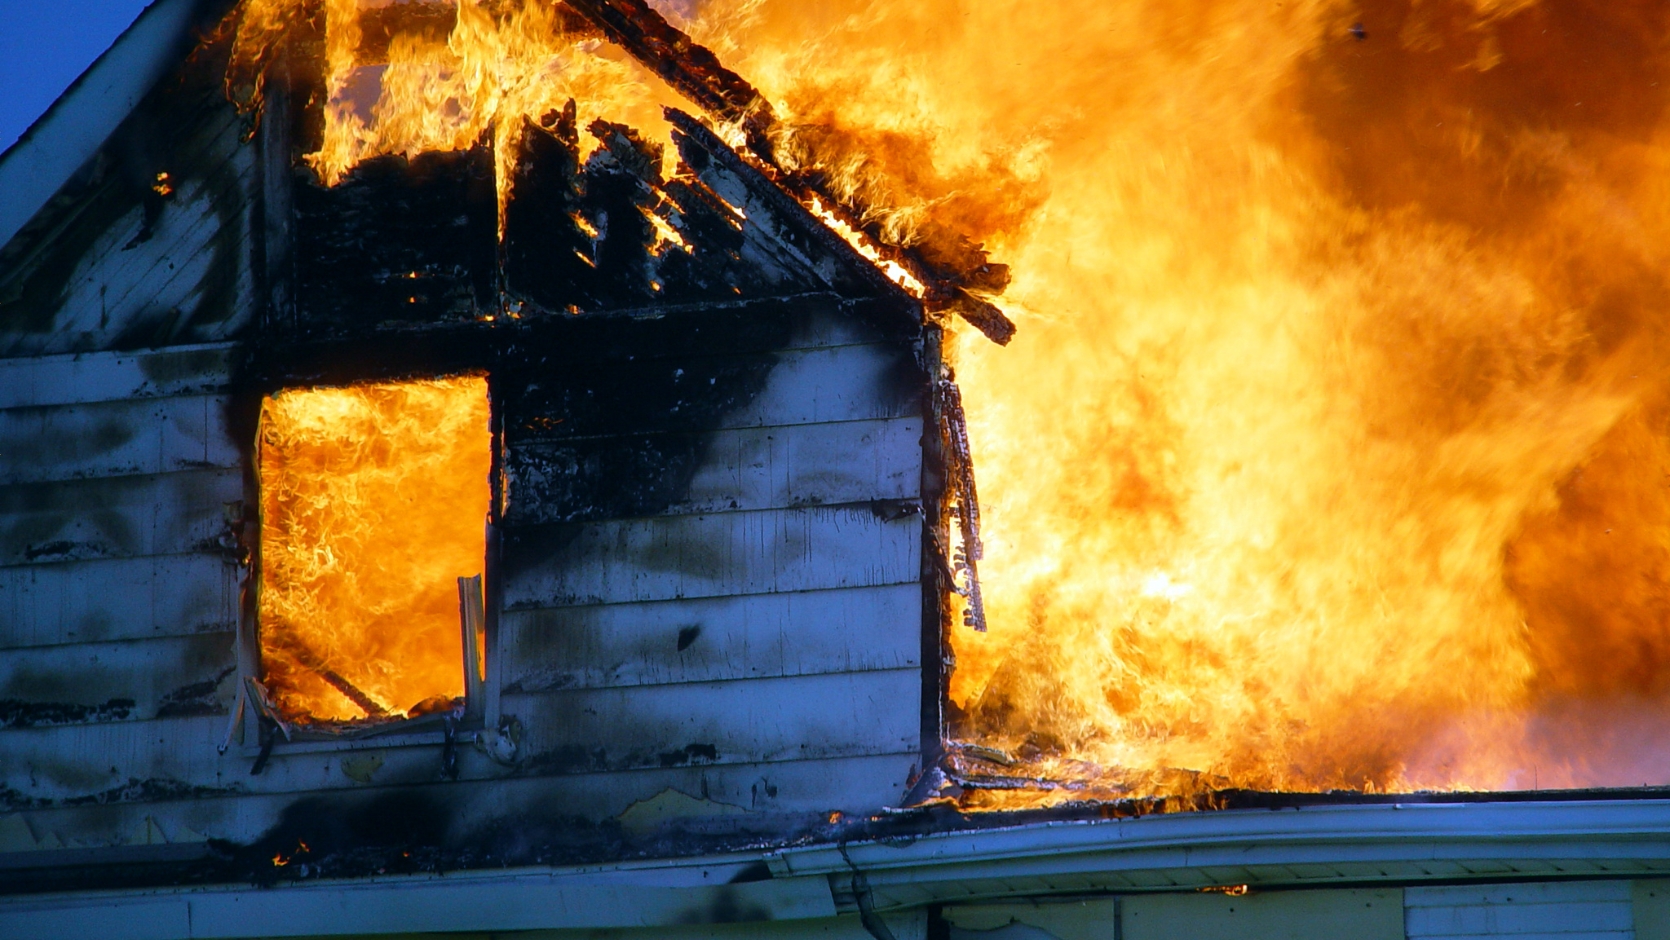 “The house I was buying suffered extensive fire damage, so I’m entitled to rescind the contract.” Which case won?